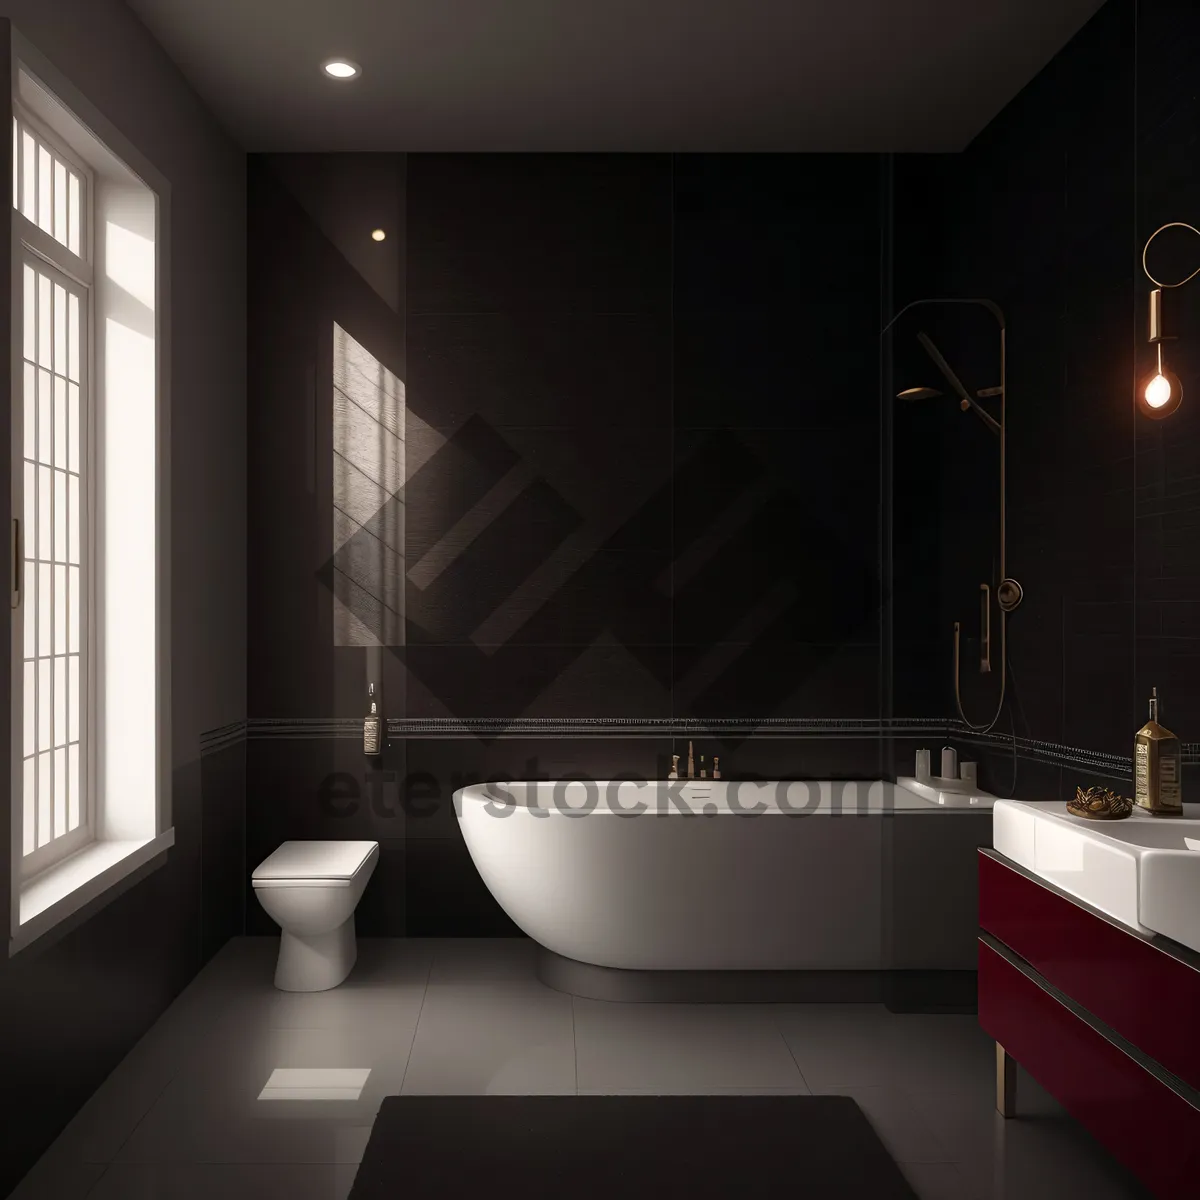 Picture of Modern Bathroom with Luxury Bathtub and Stylish Decor